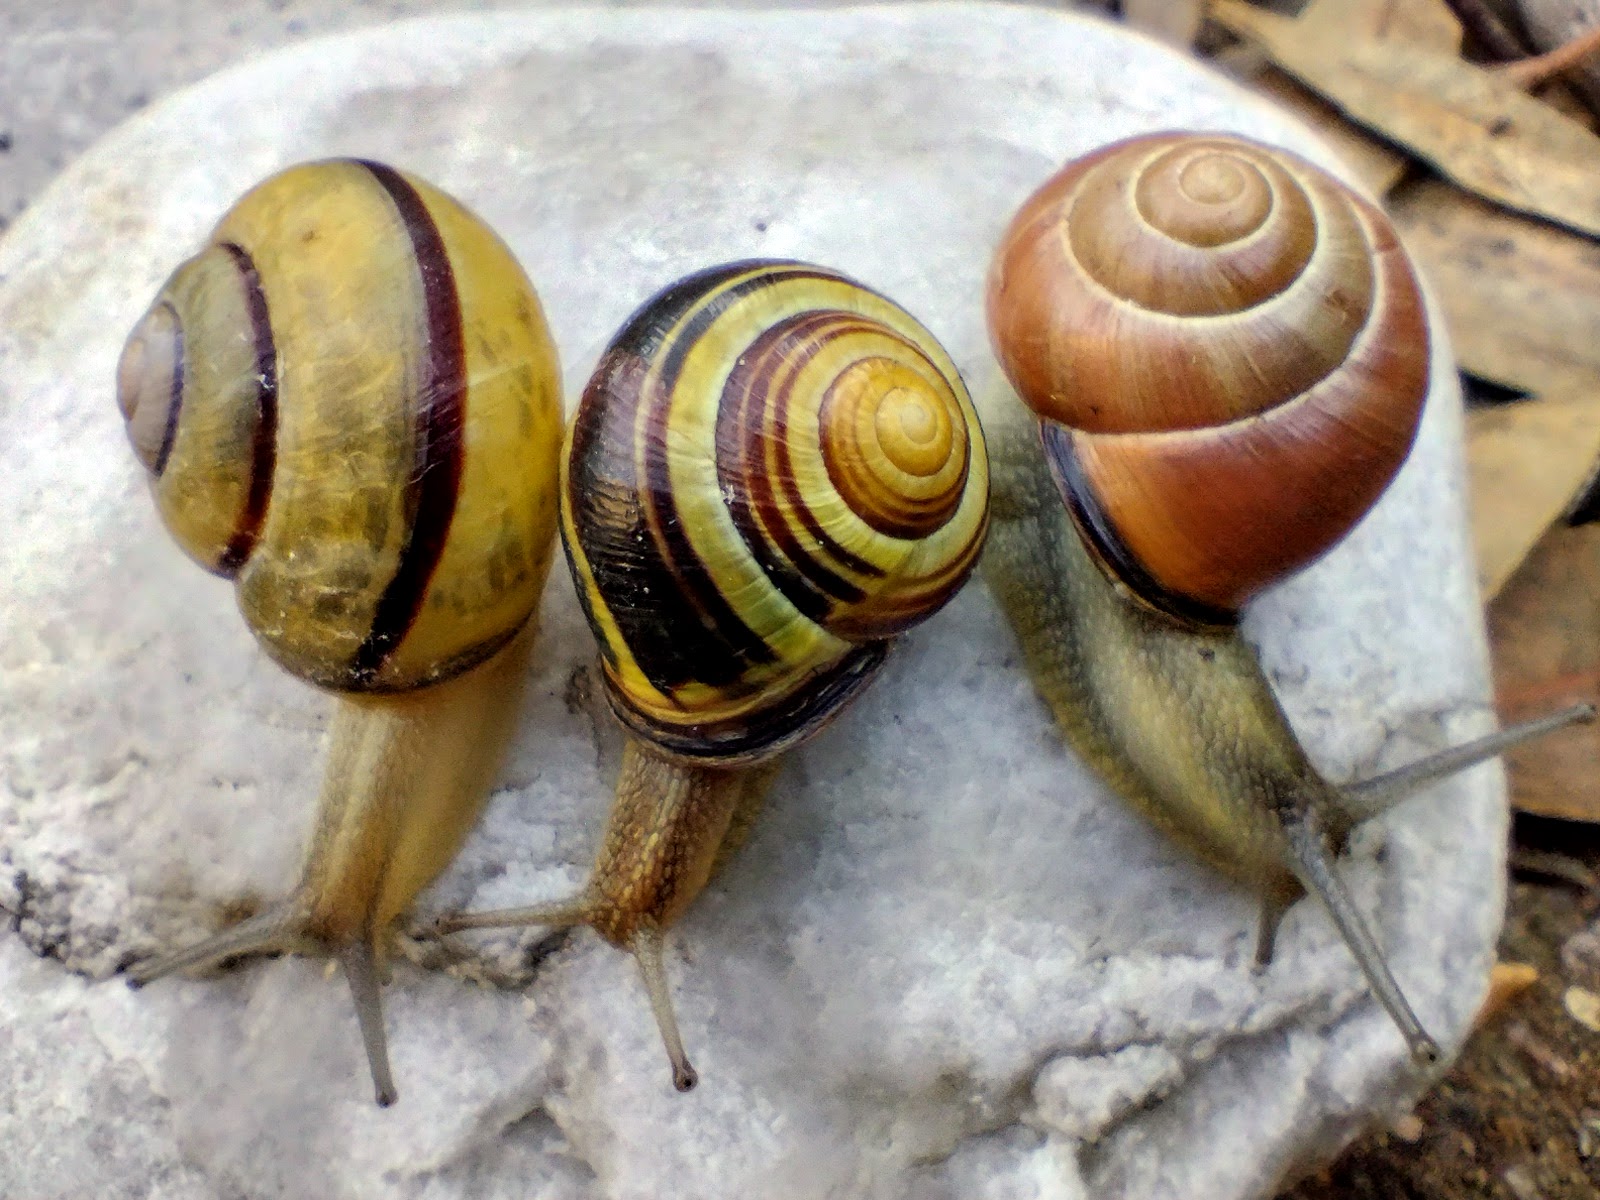 lefty snail in middle